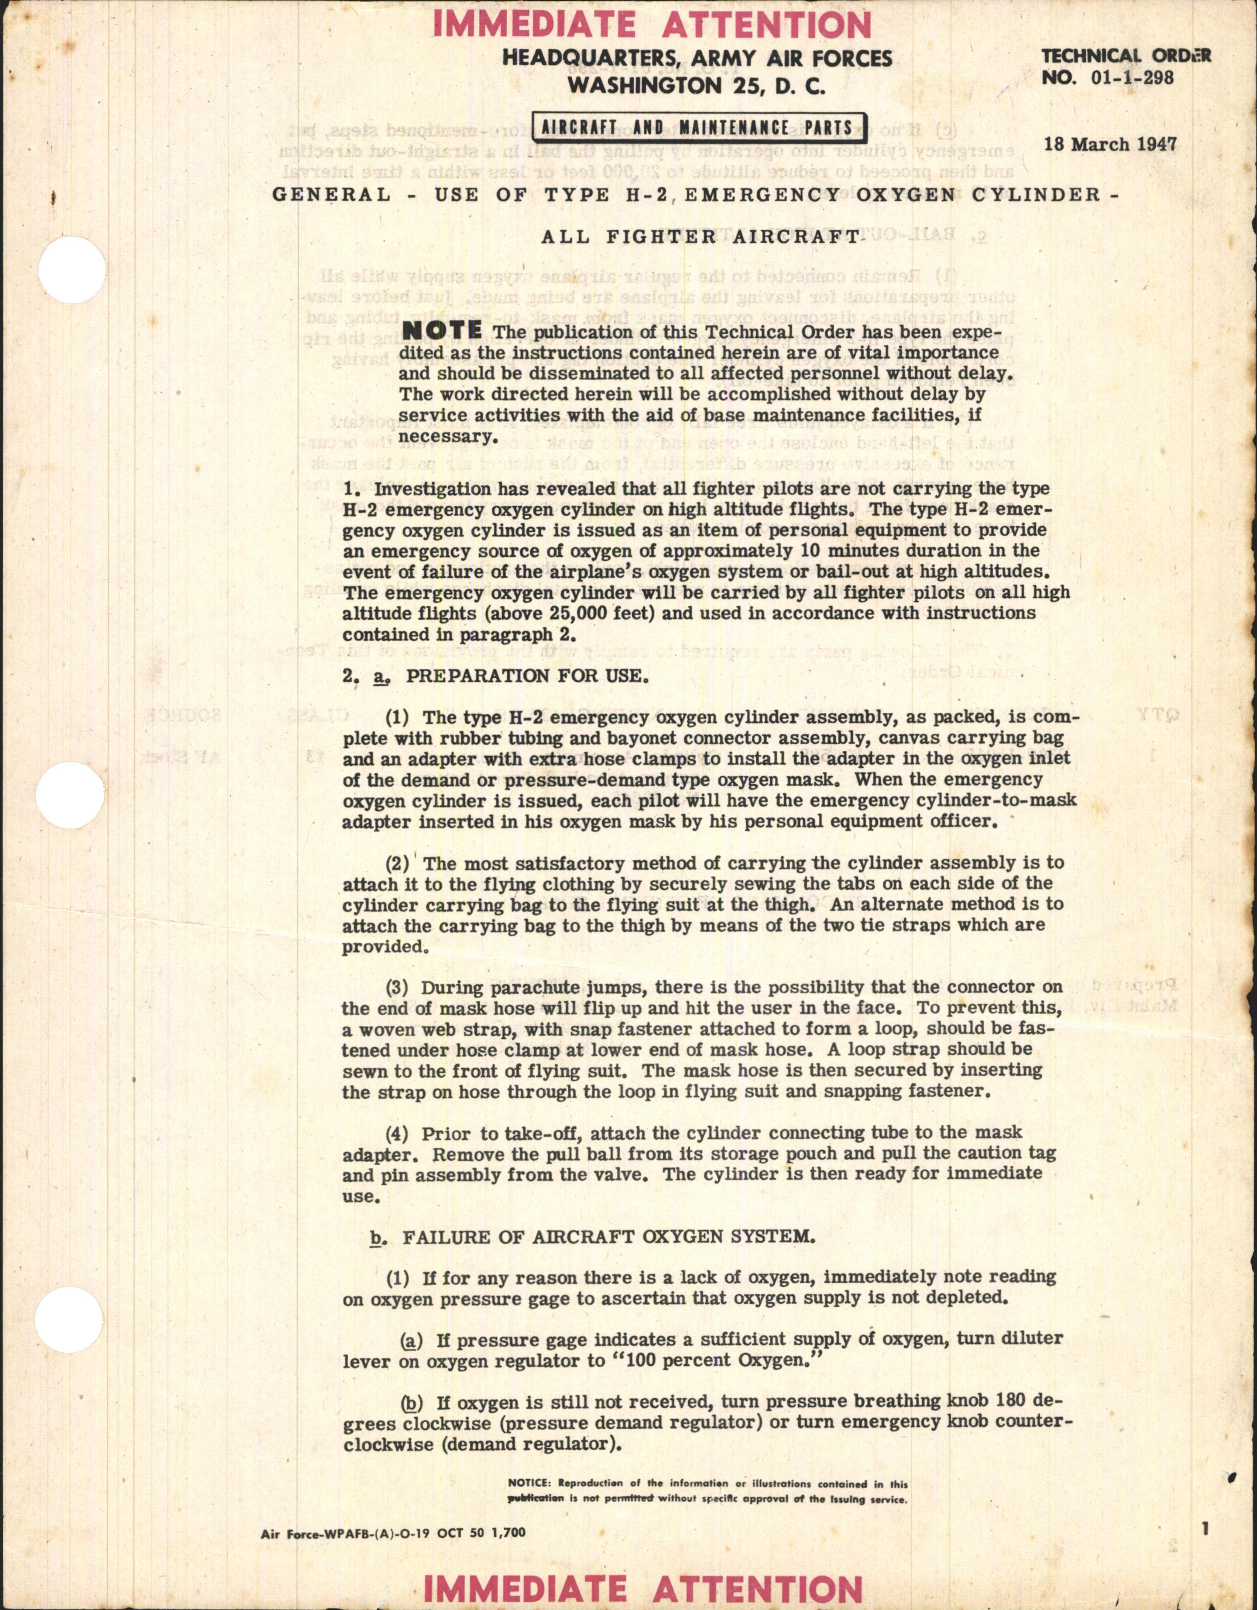 Sample page 1 from AirCorps Library document: Aircraft and Maintenance Parts for Use of Type H-2, Emergency Oxygen Cylinder- All Fighter Aircraft